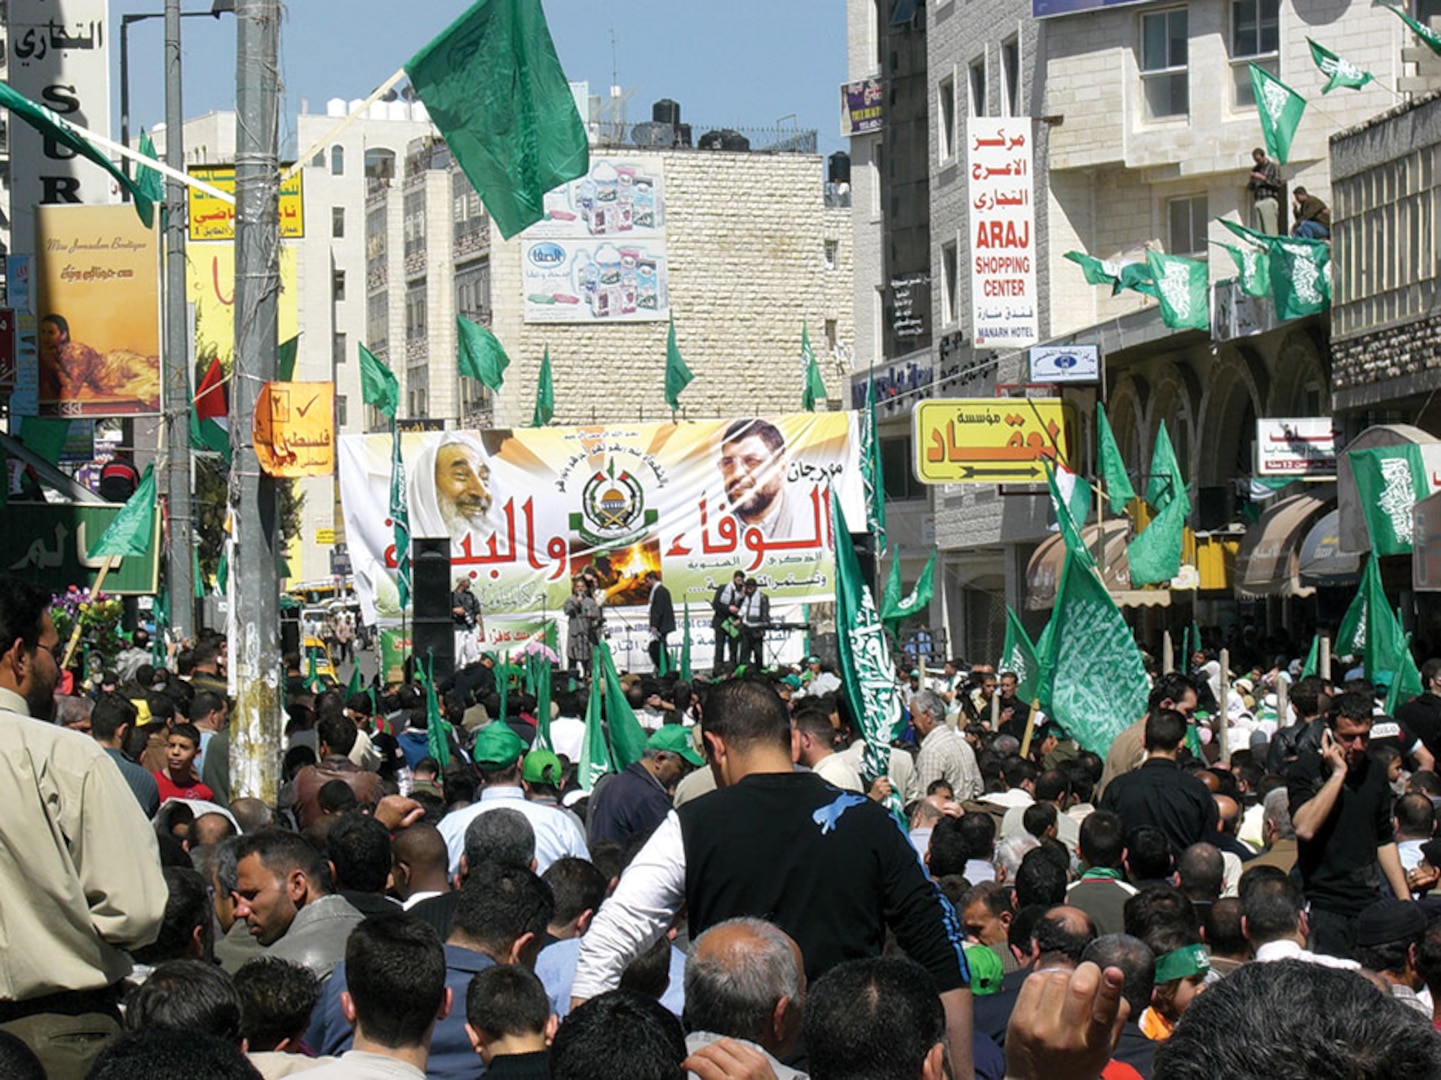 In Ramallah, a Palestinian city located in the central West Bank, crowds of people gather to show their support for Hamas. In certain parts of Palestine, Hamas is viewed as a protector against the Israel Defense Force (IDF).